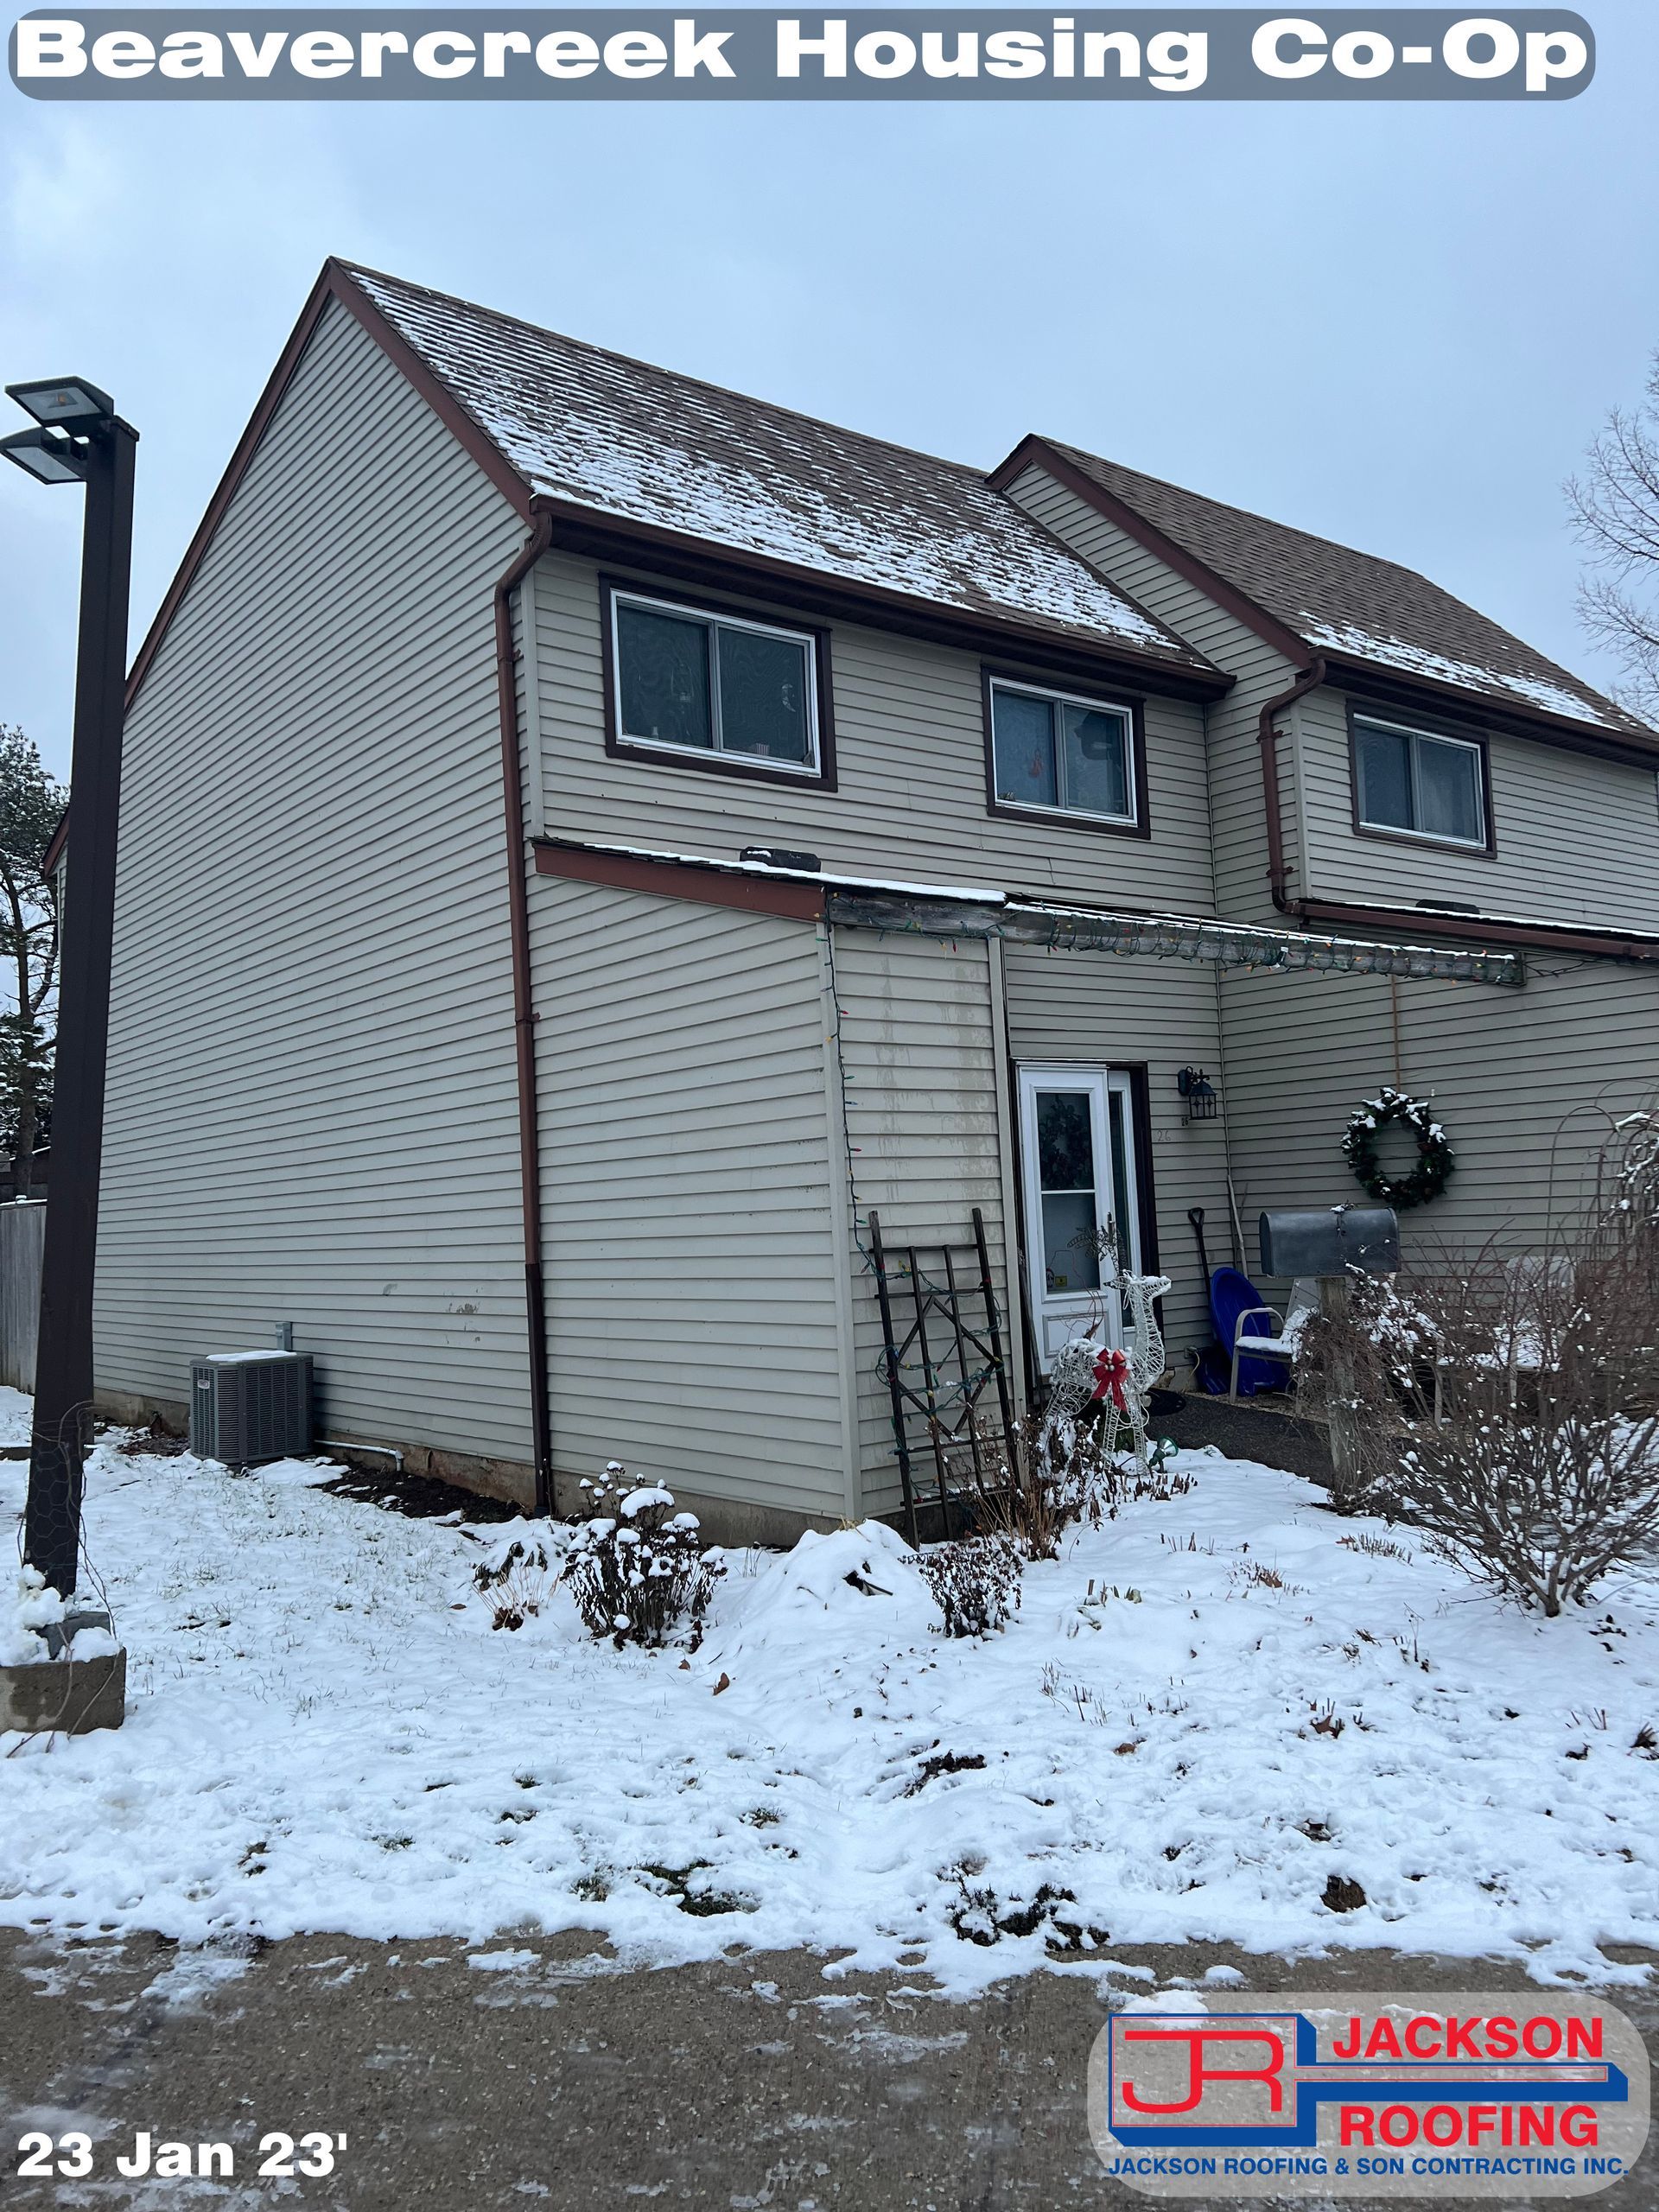 A beavercreek housing co-op house with snow on the ground